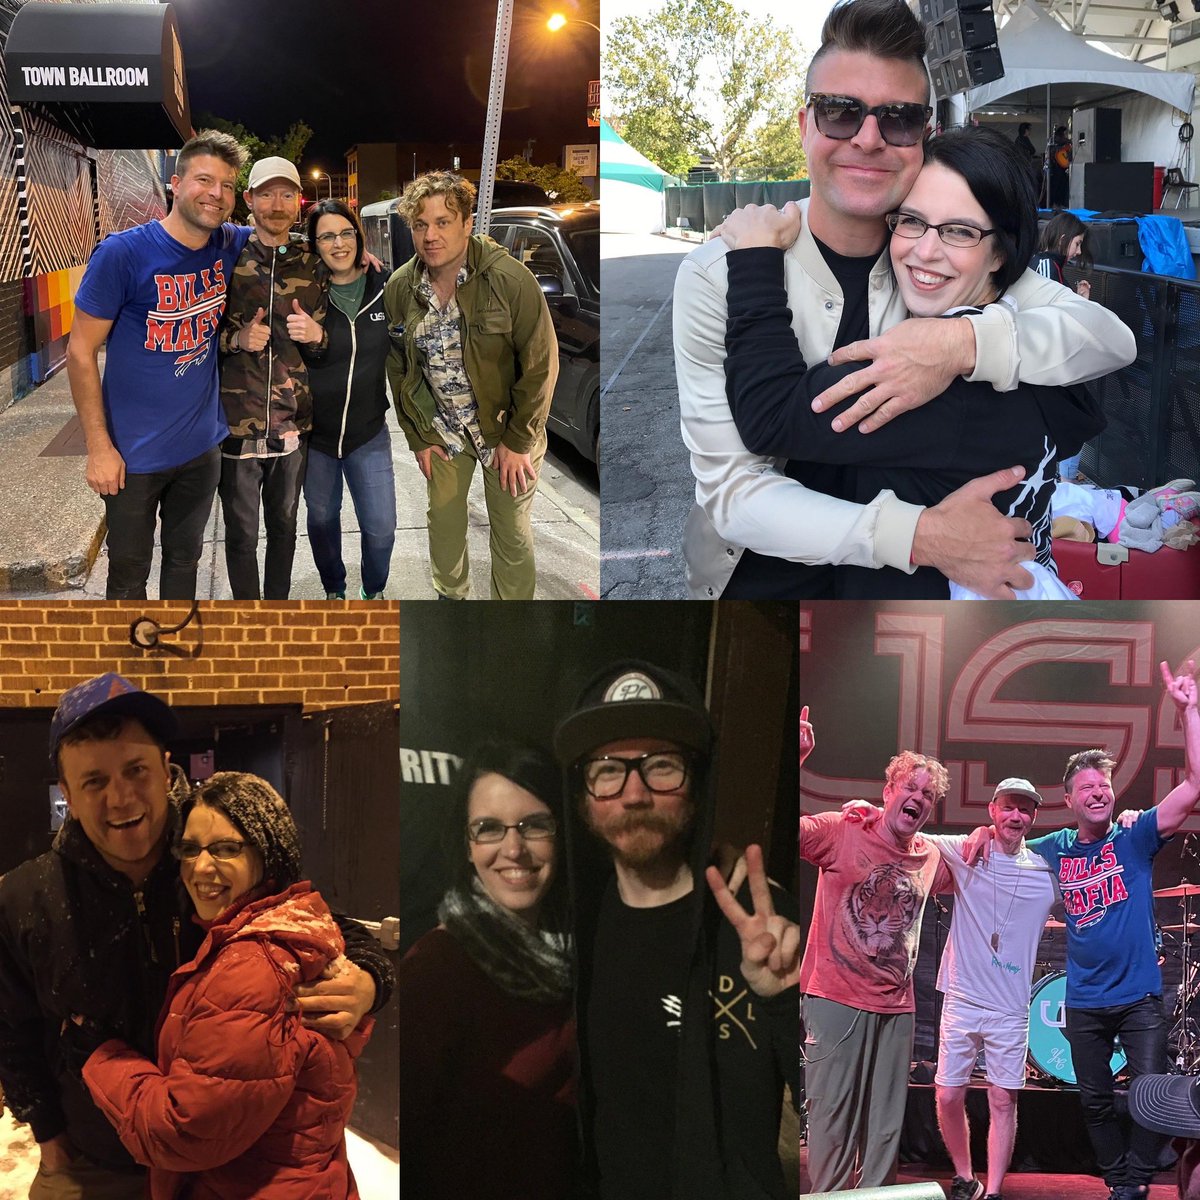 All I want for Christmas is to see these guys again. Wishing my favorite trio a very Merry Christmas and hopes that 2023 brings you nothing but the very best life has to offer. Sending you love always from WNY! ♥️🎄🫶🏻 #notwitterash #ubiquitouslove #ussfam @USSMUSIC